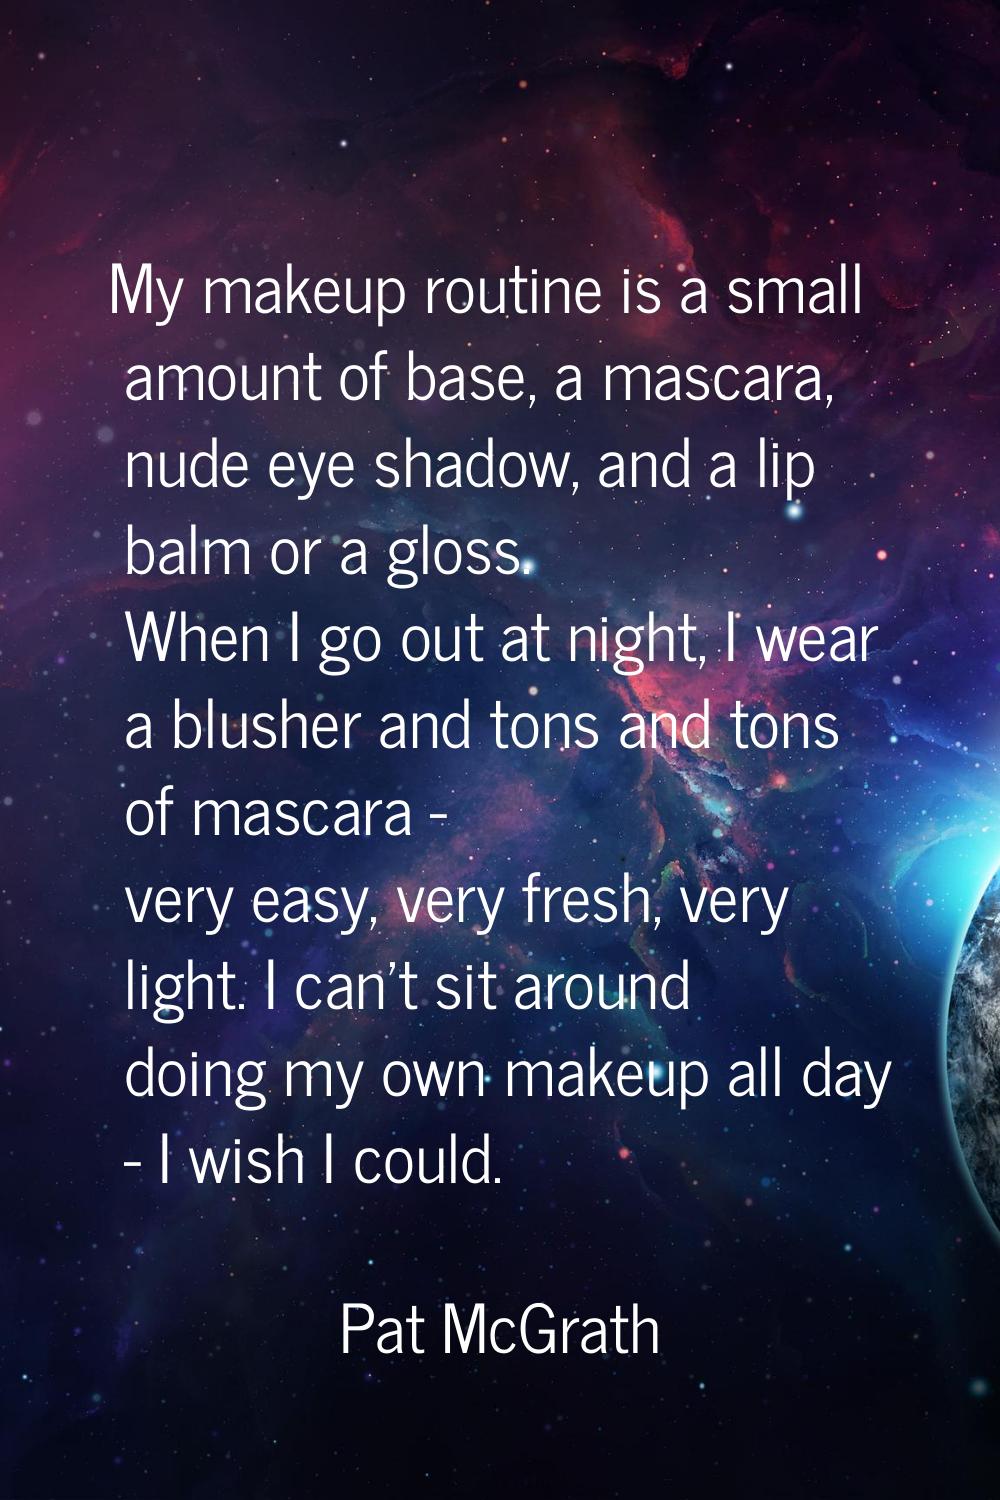 My makeup routine is a small amount of base, a mascara, nude eye shadow, and a lip balm or a gloss.